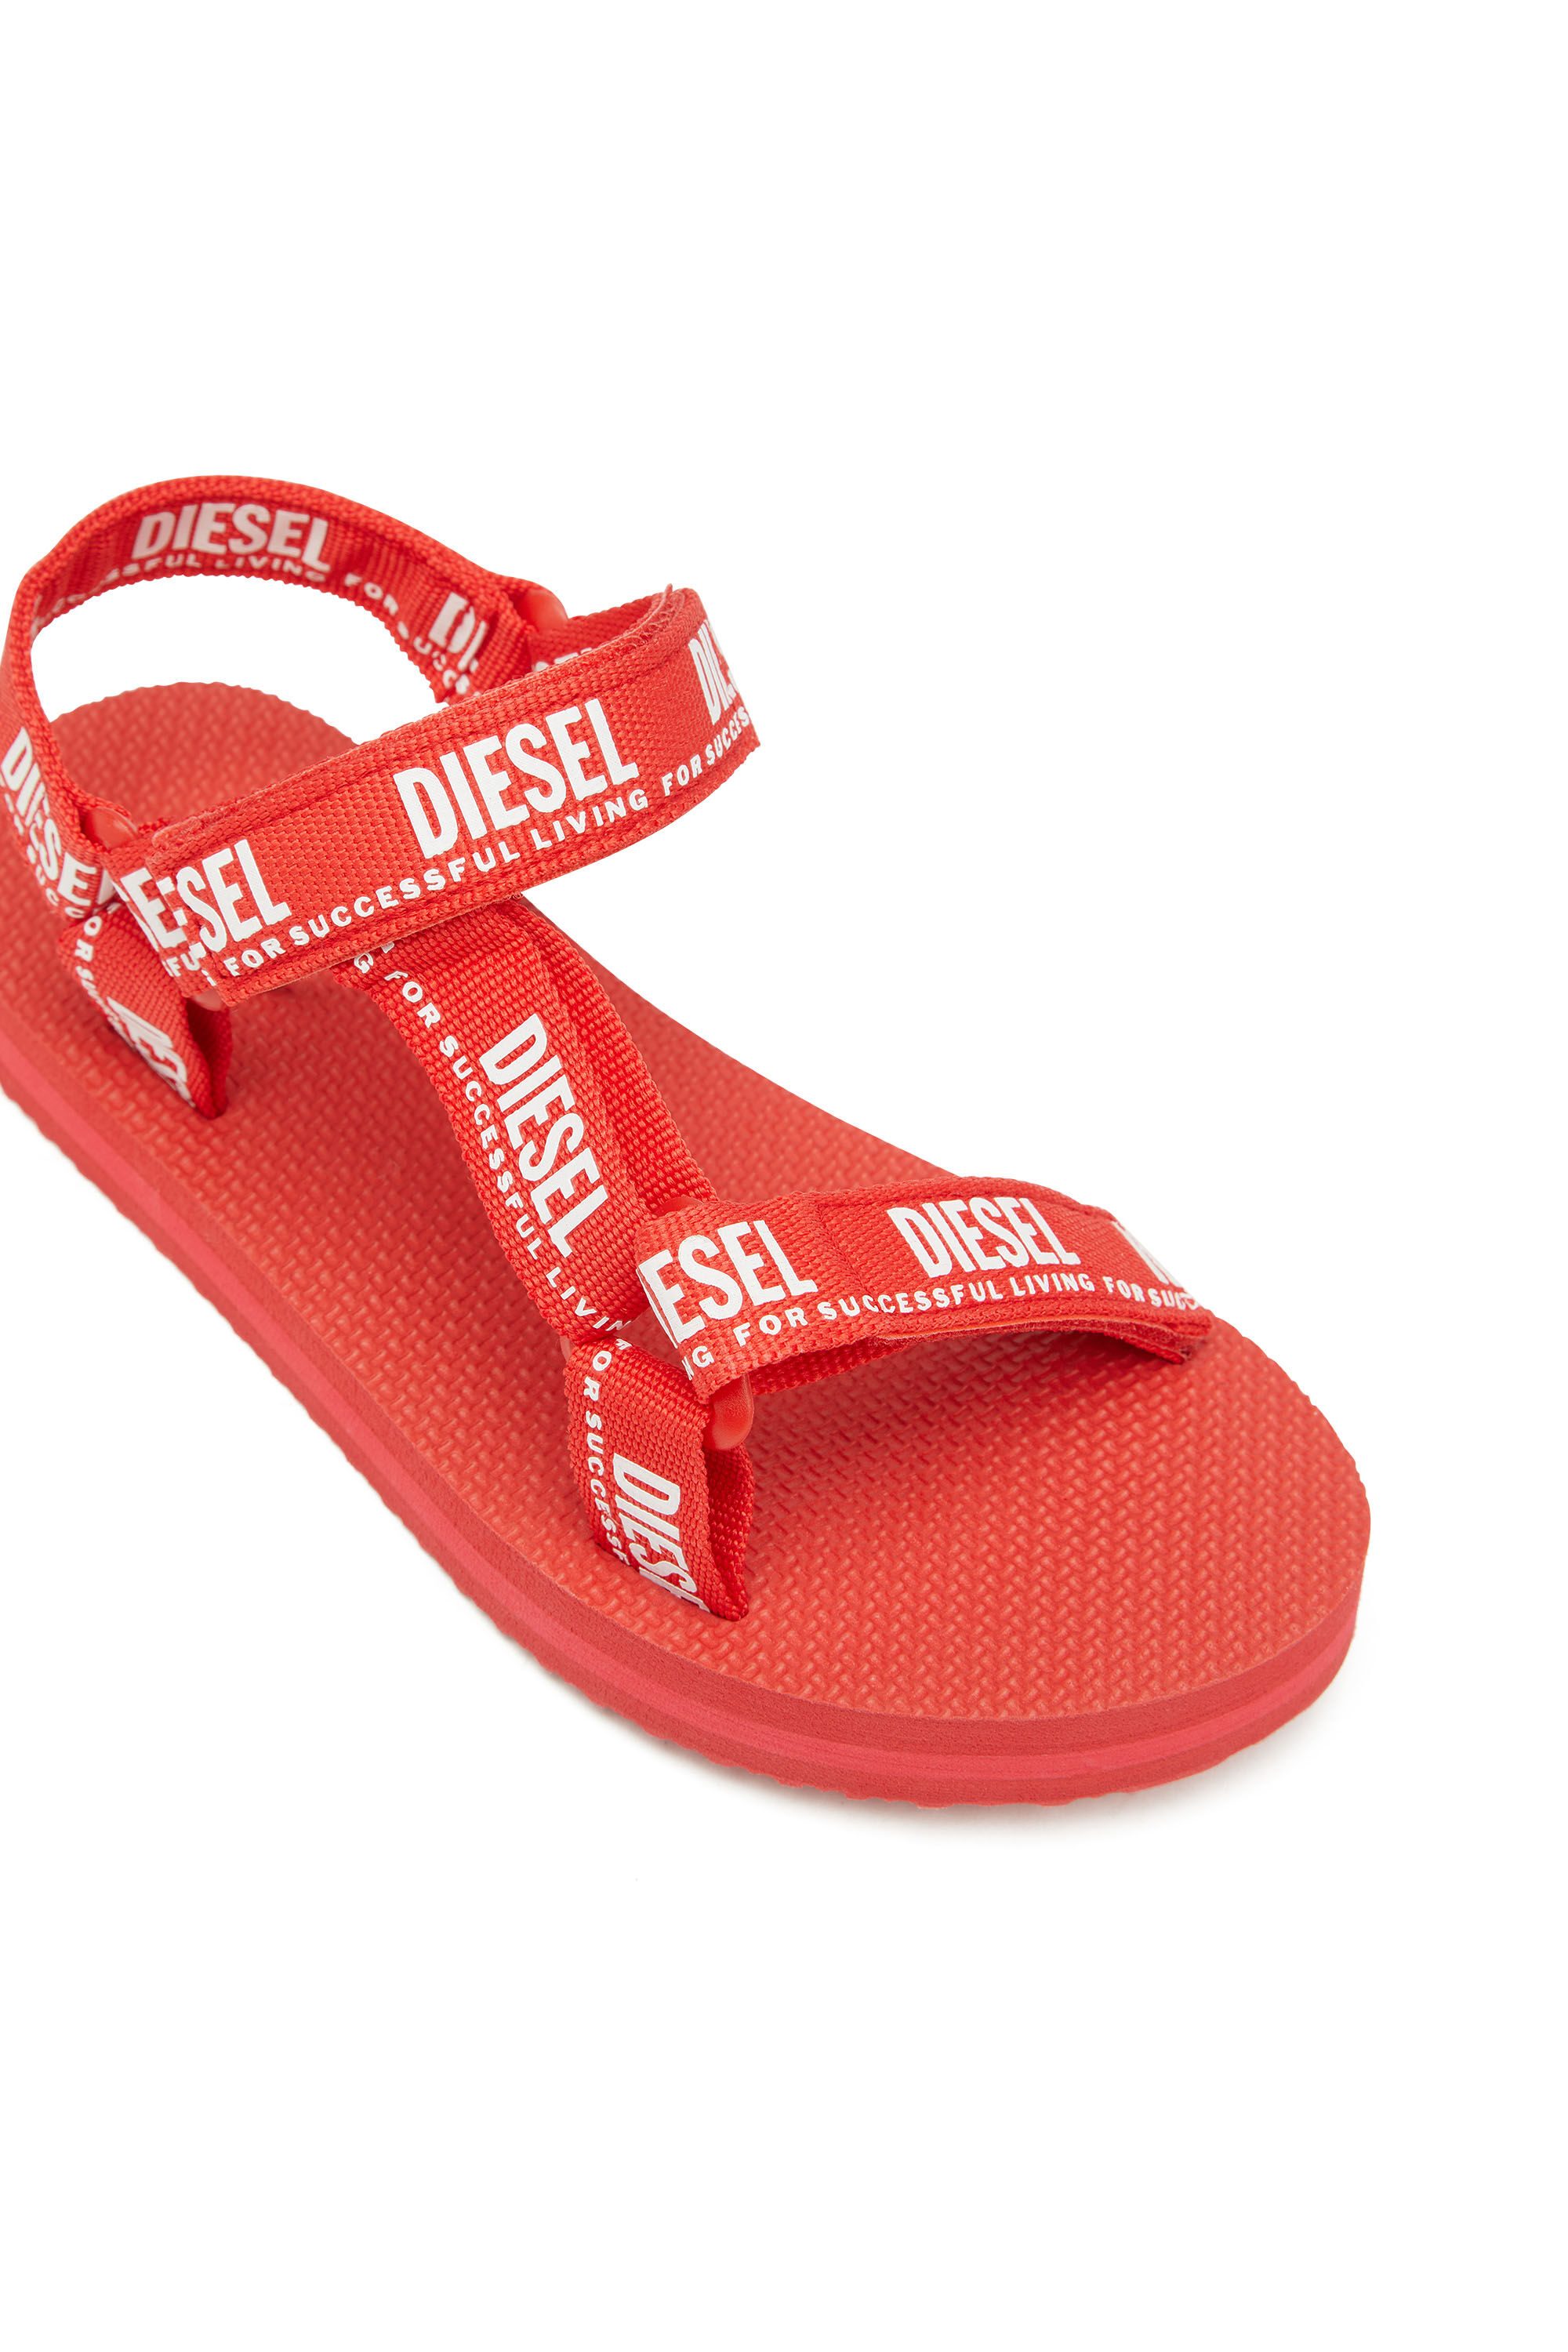 Diesel - S-ANDAL T, レッド - Image 4